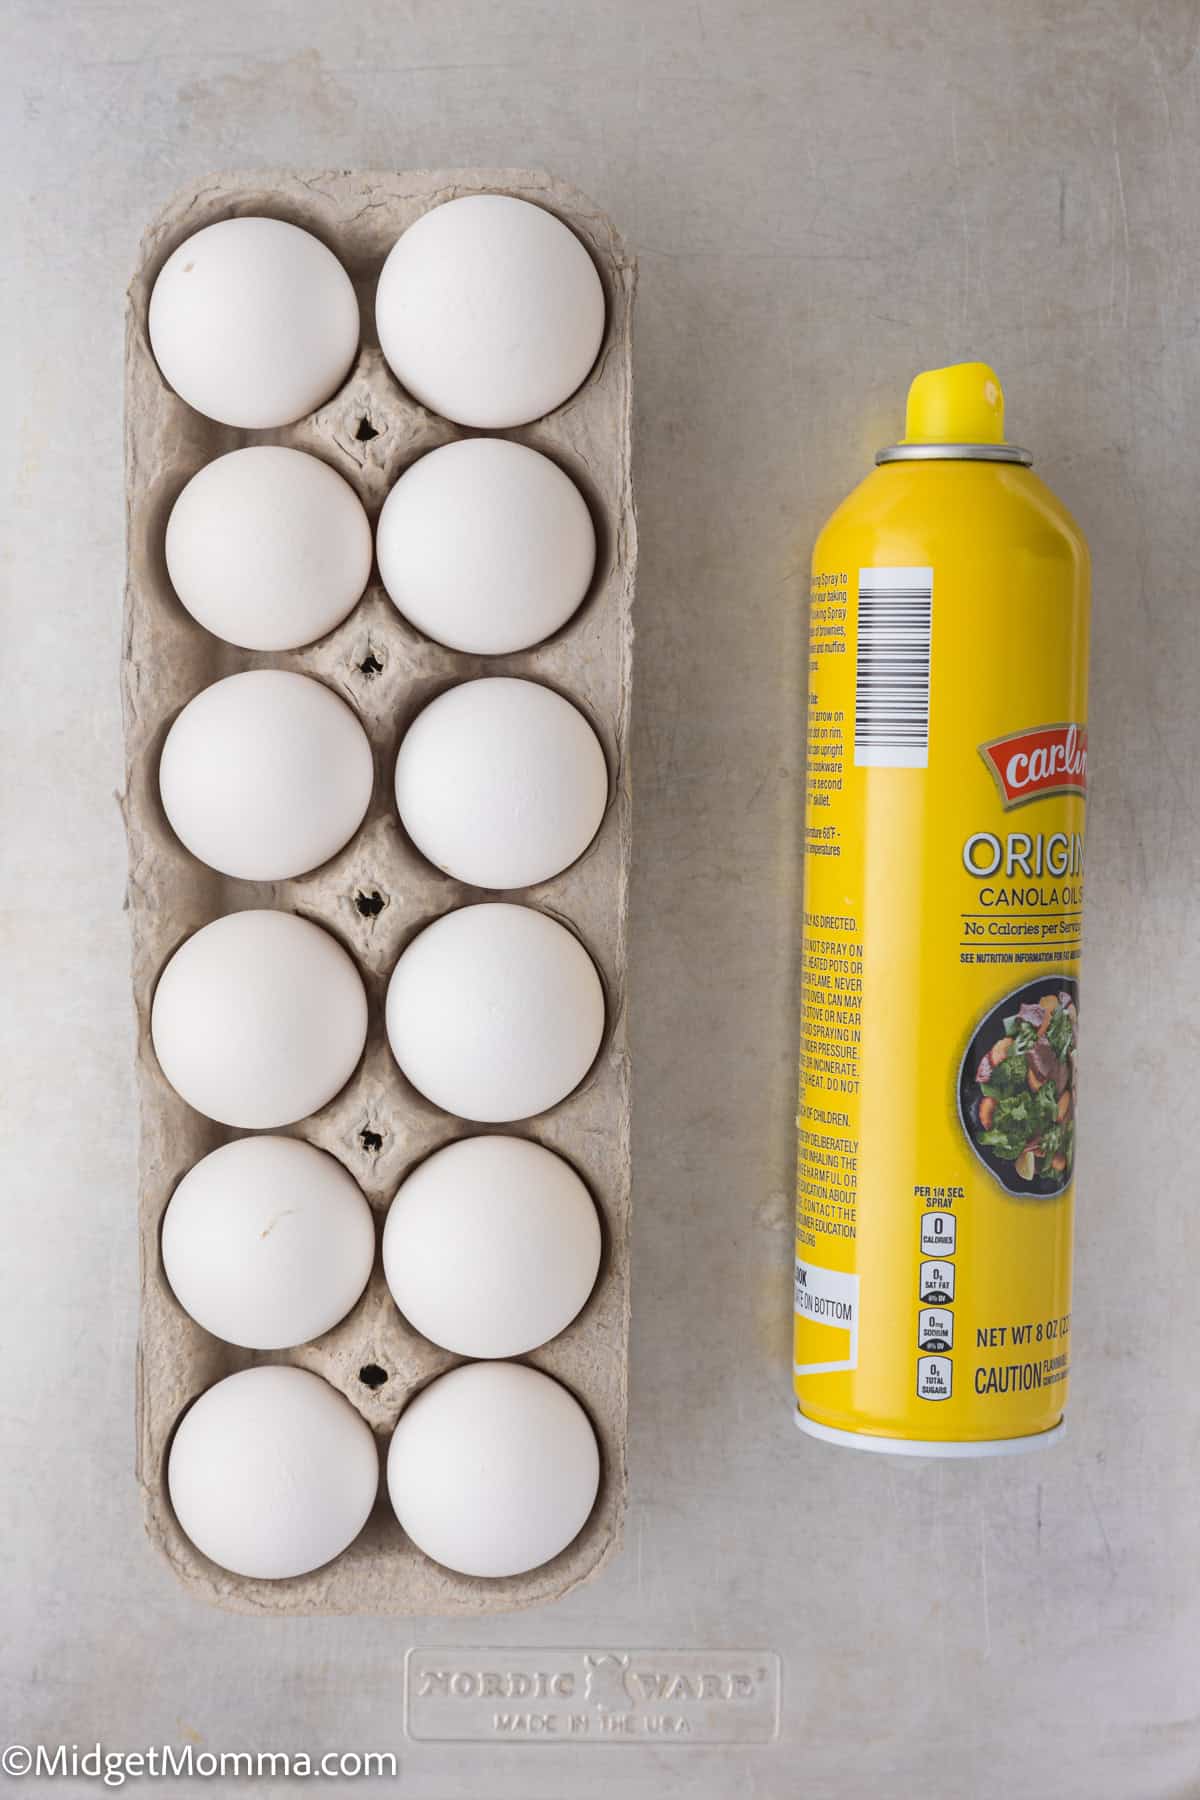 A carton holding 10 white eggs is placed next to a yellow can of non-stick cooking spray on a light gray surface.